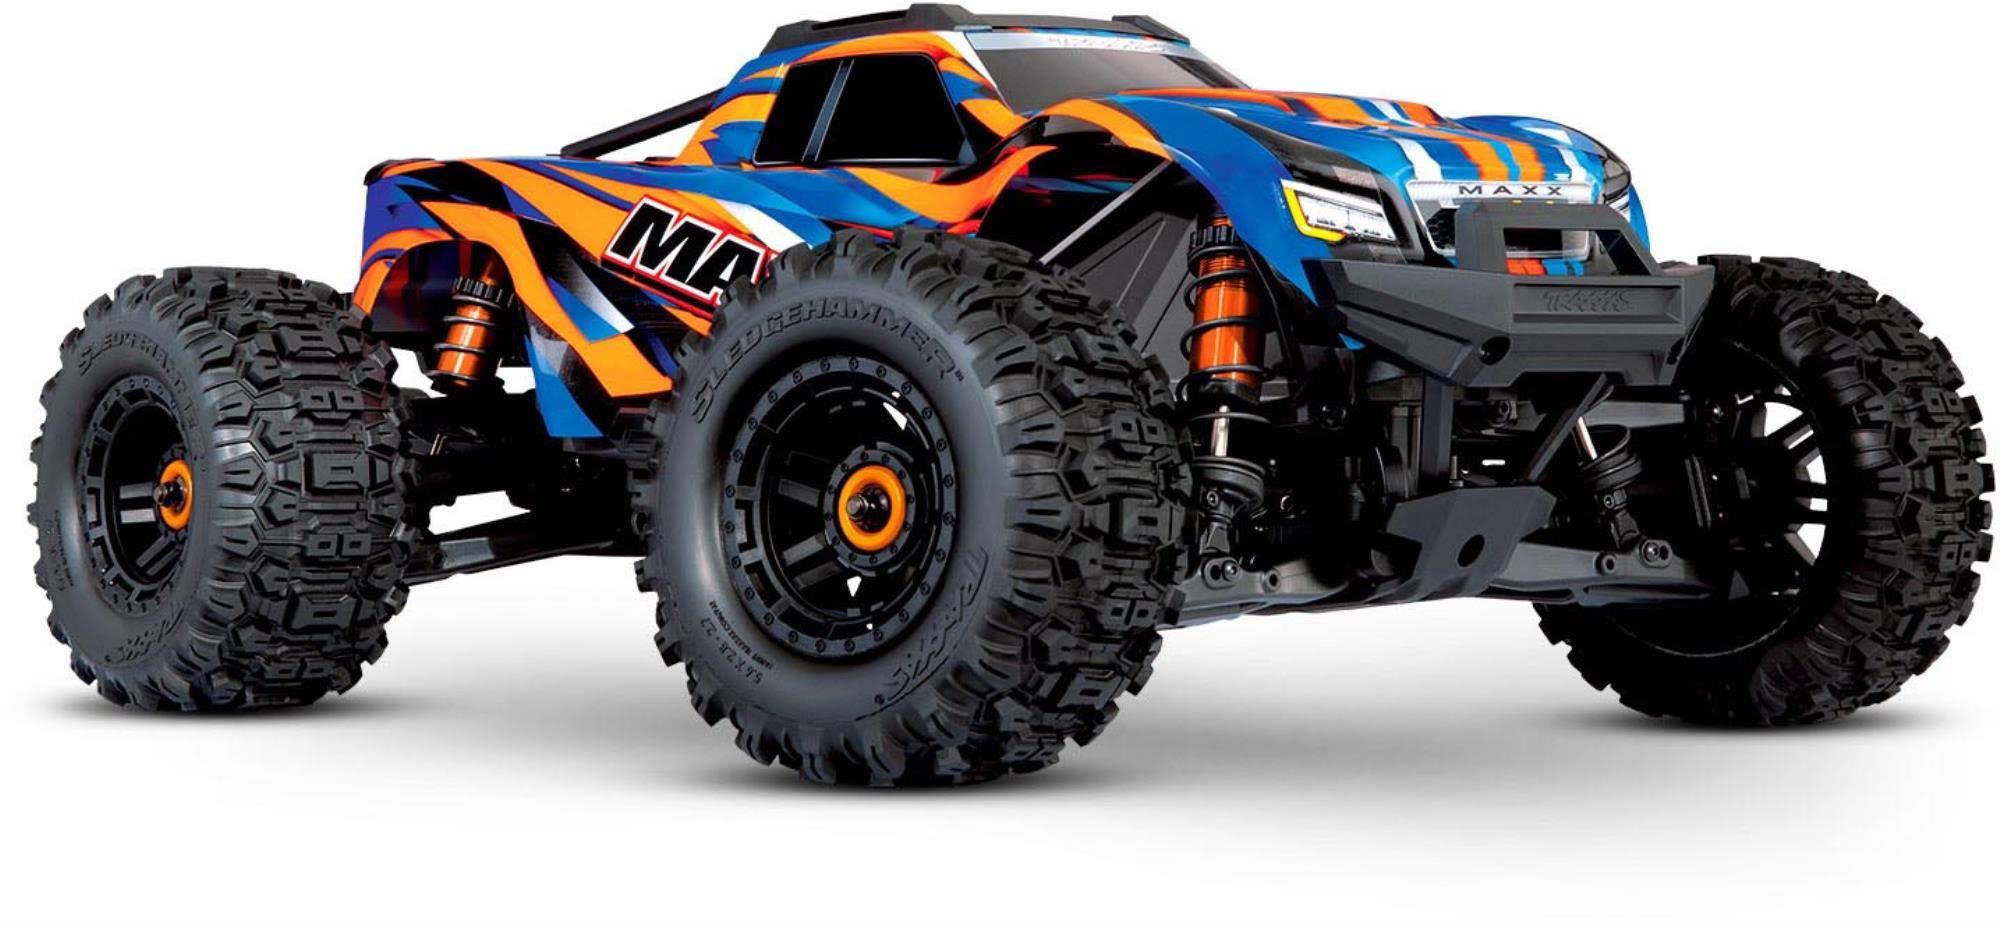 Traxxas Maxx V2 with WideMaxx 1/10 Electric RC Monster Truck- Orange 89086-4